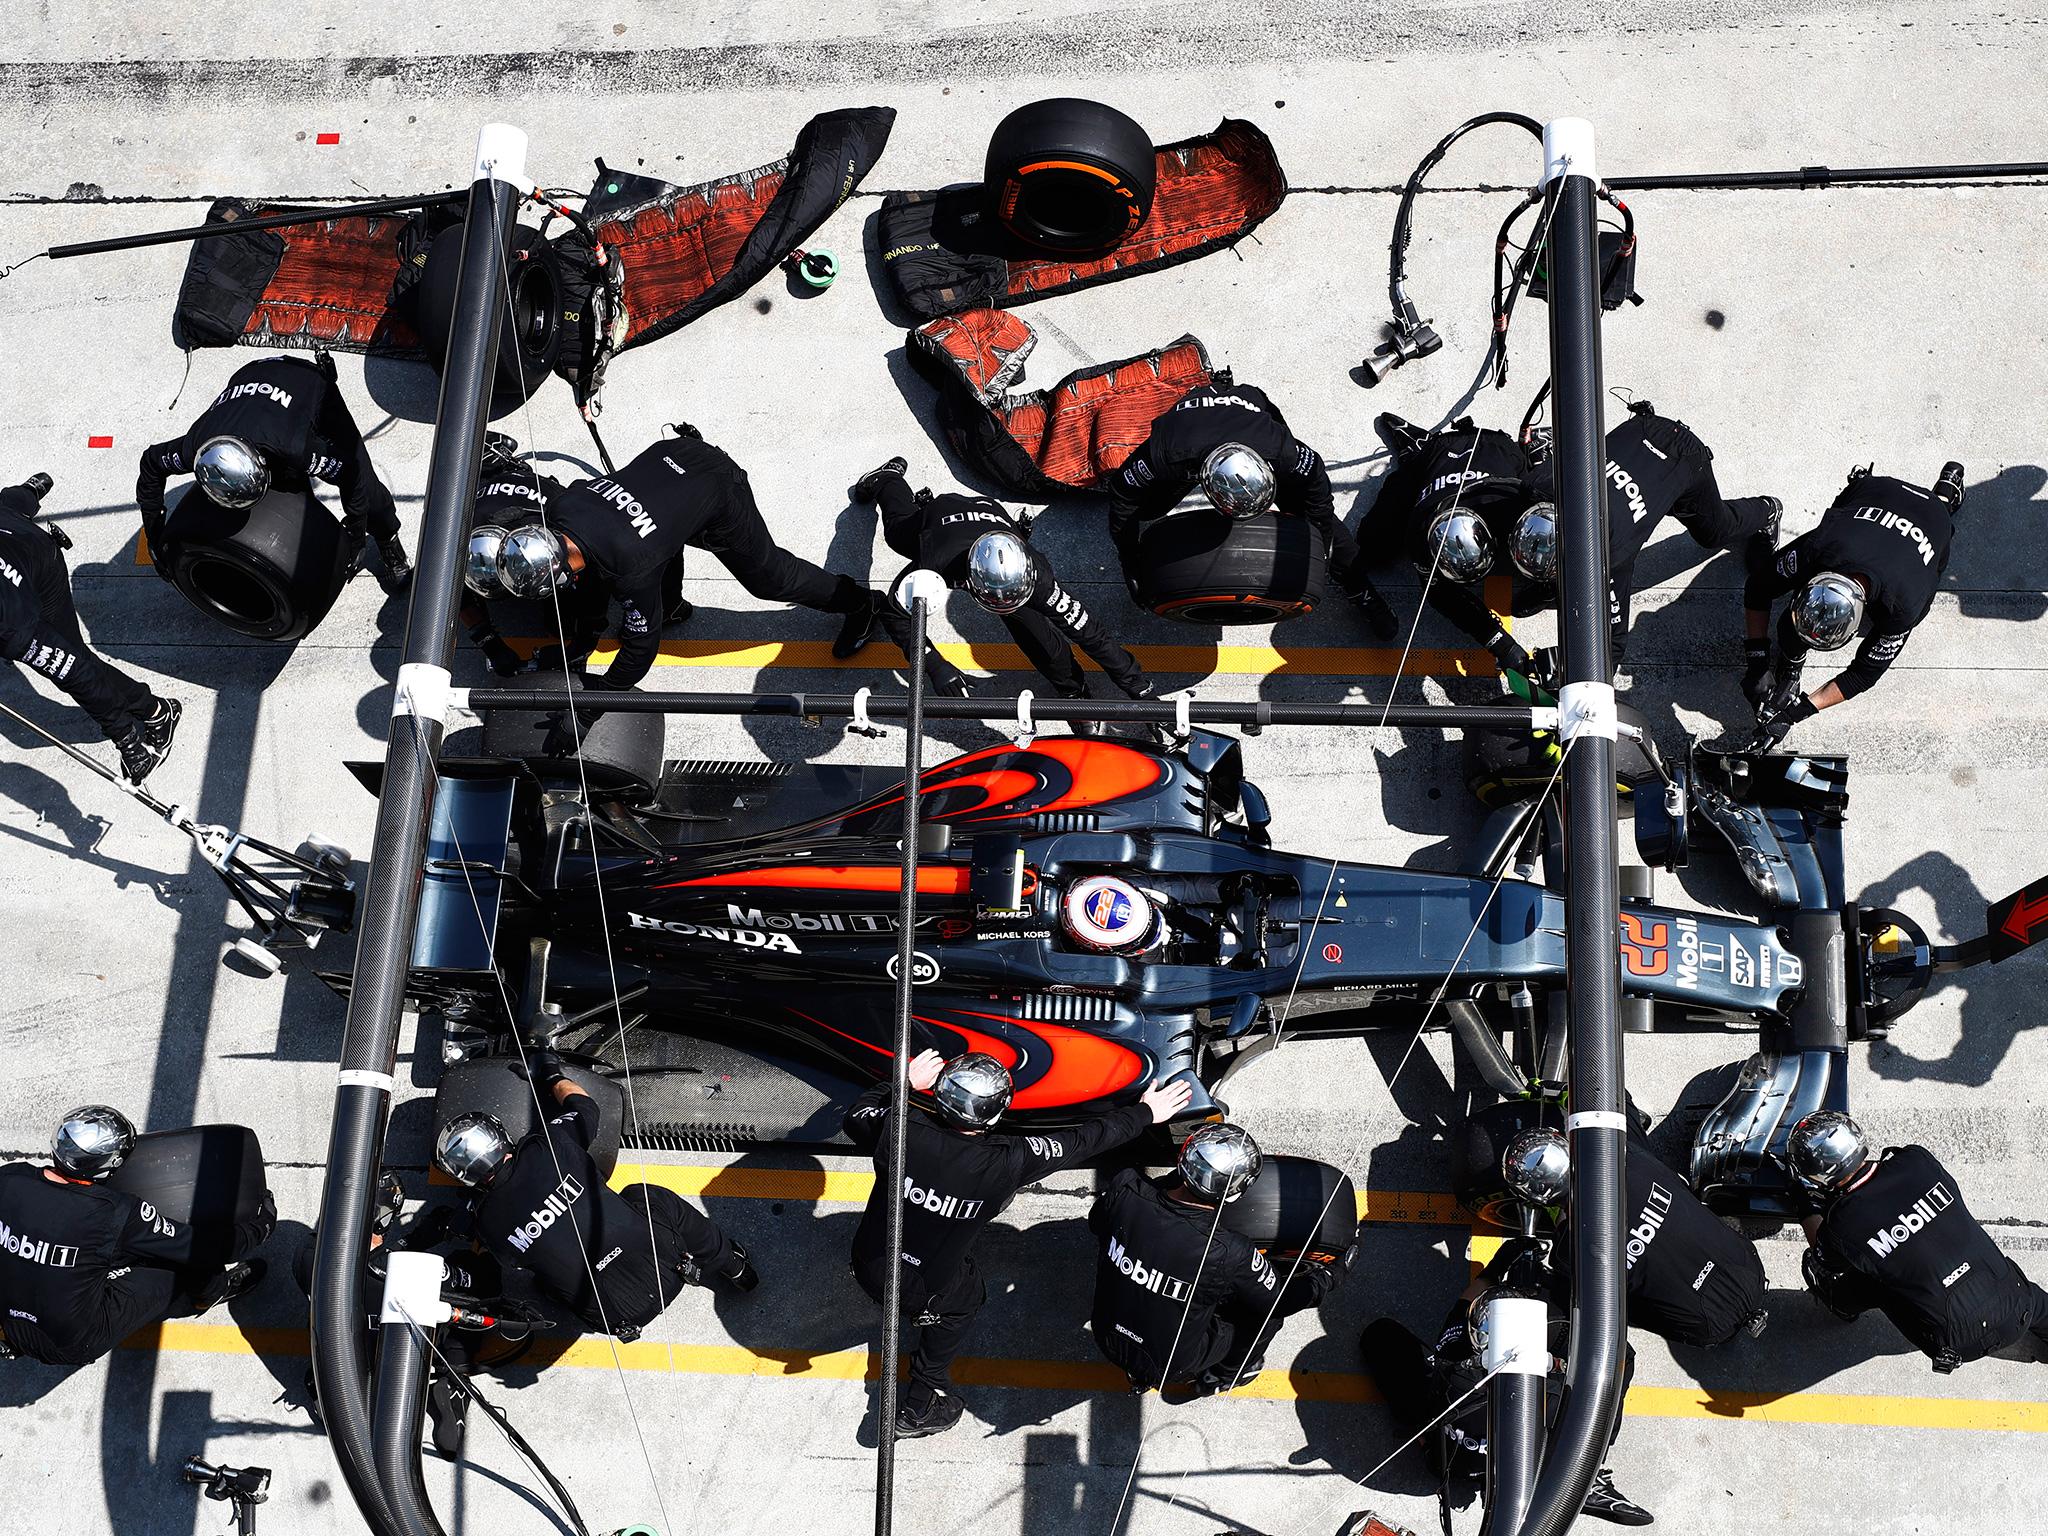 Every milisecond counts when McLaren's pit team are at work